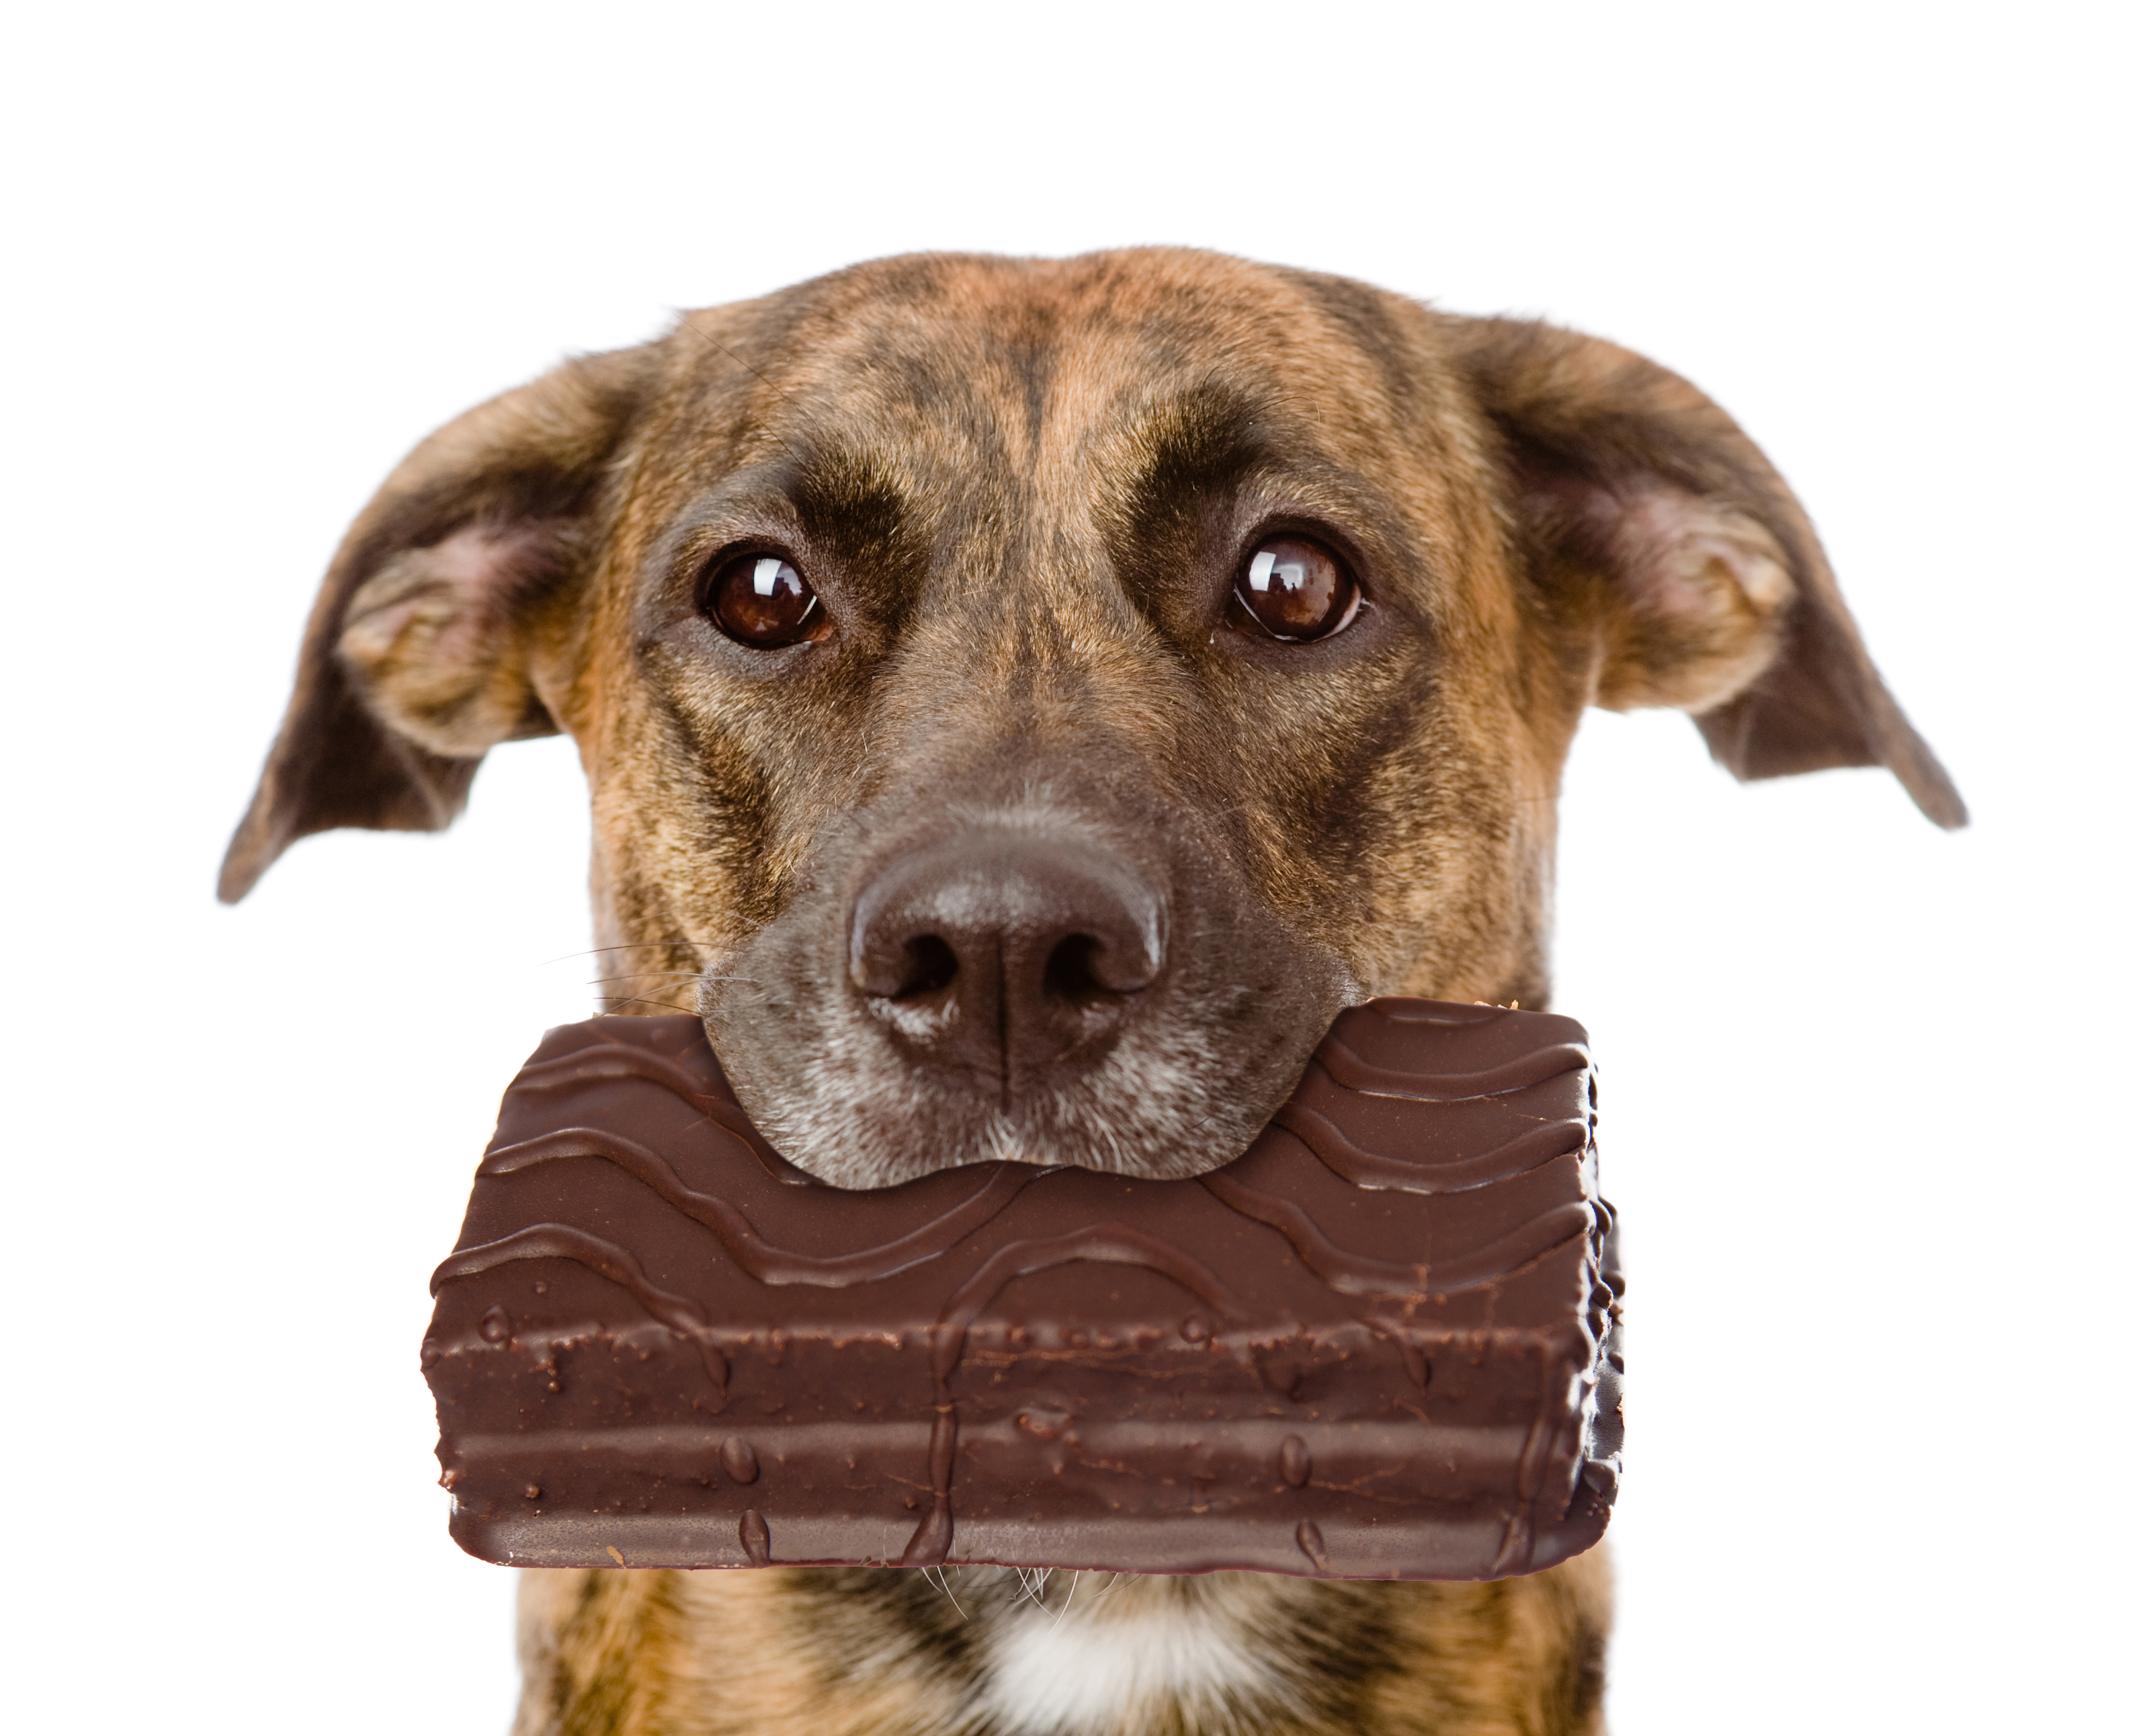 Don't let dogs eat chocolate this Christmas